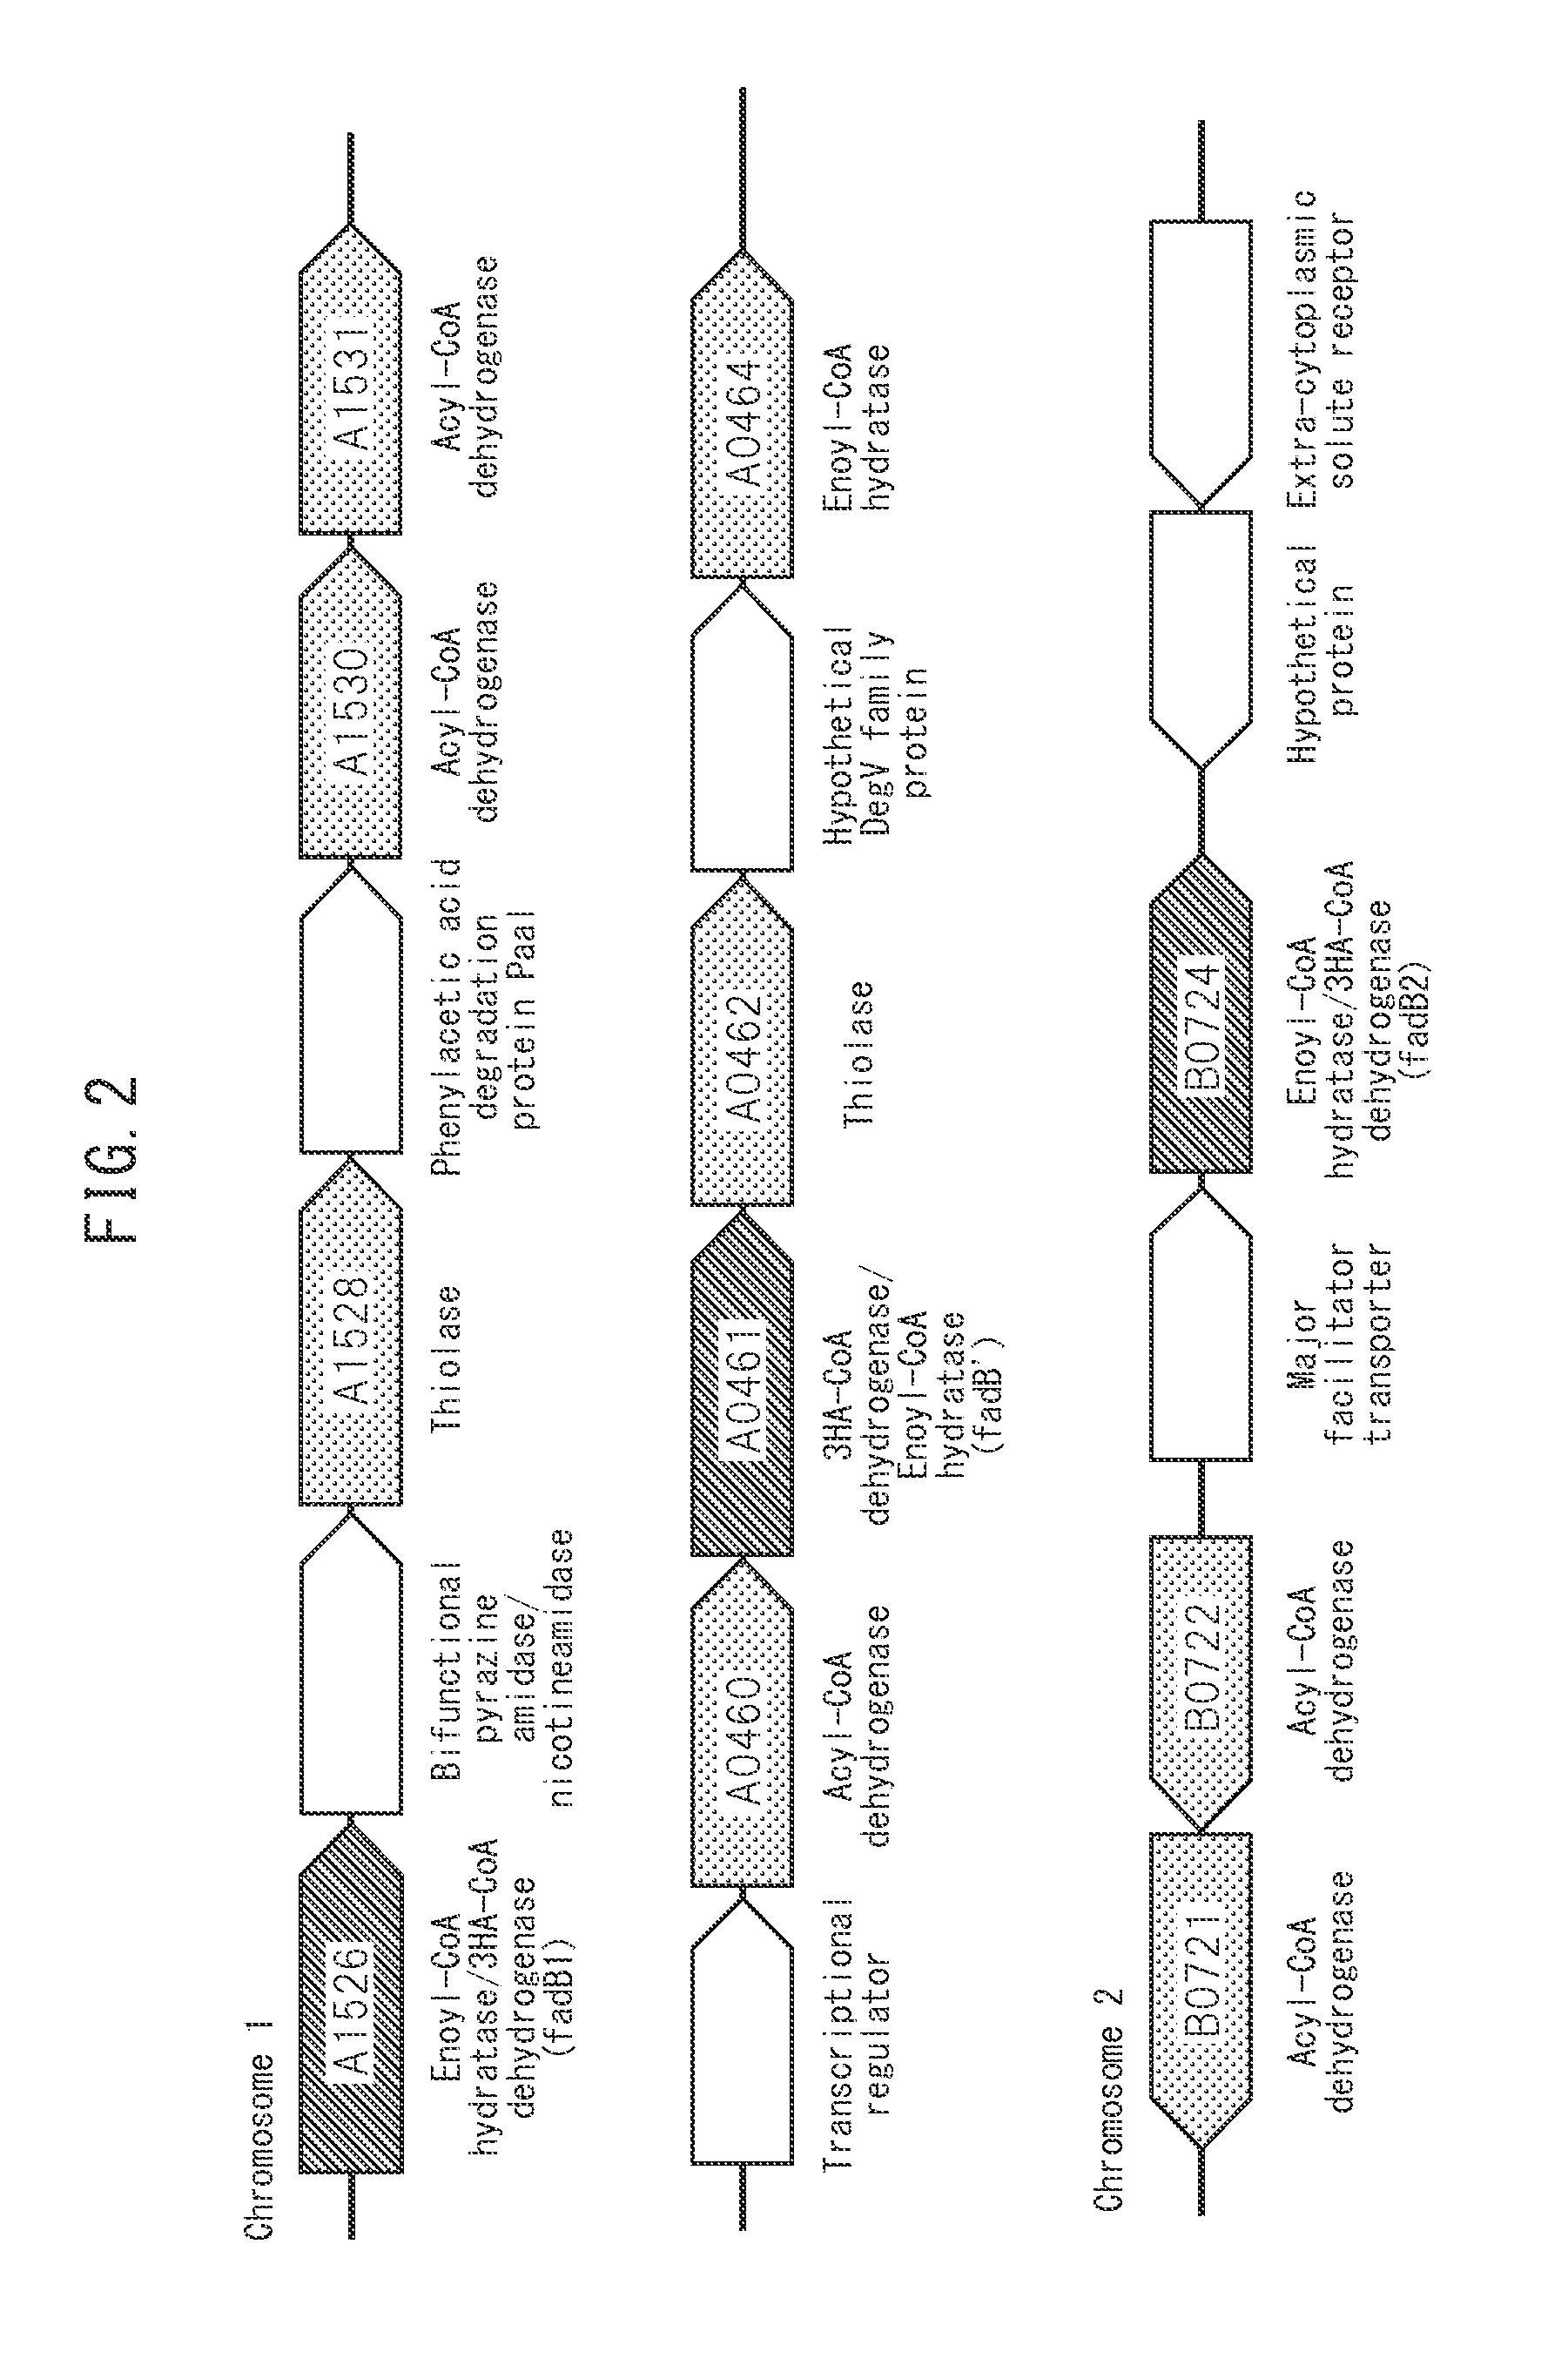 Production method for copolymer polyhydroxyalkanoate using genetically modified strain of fatty acid ß-oxidation pathway